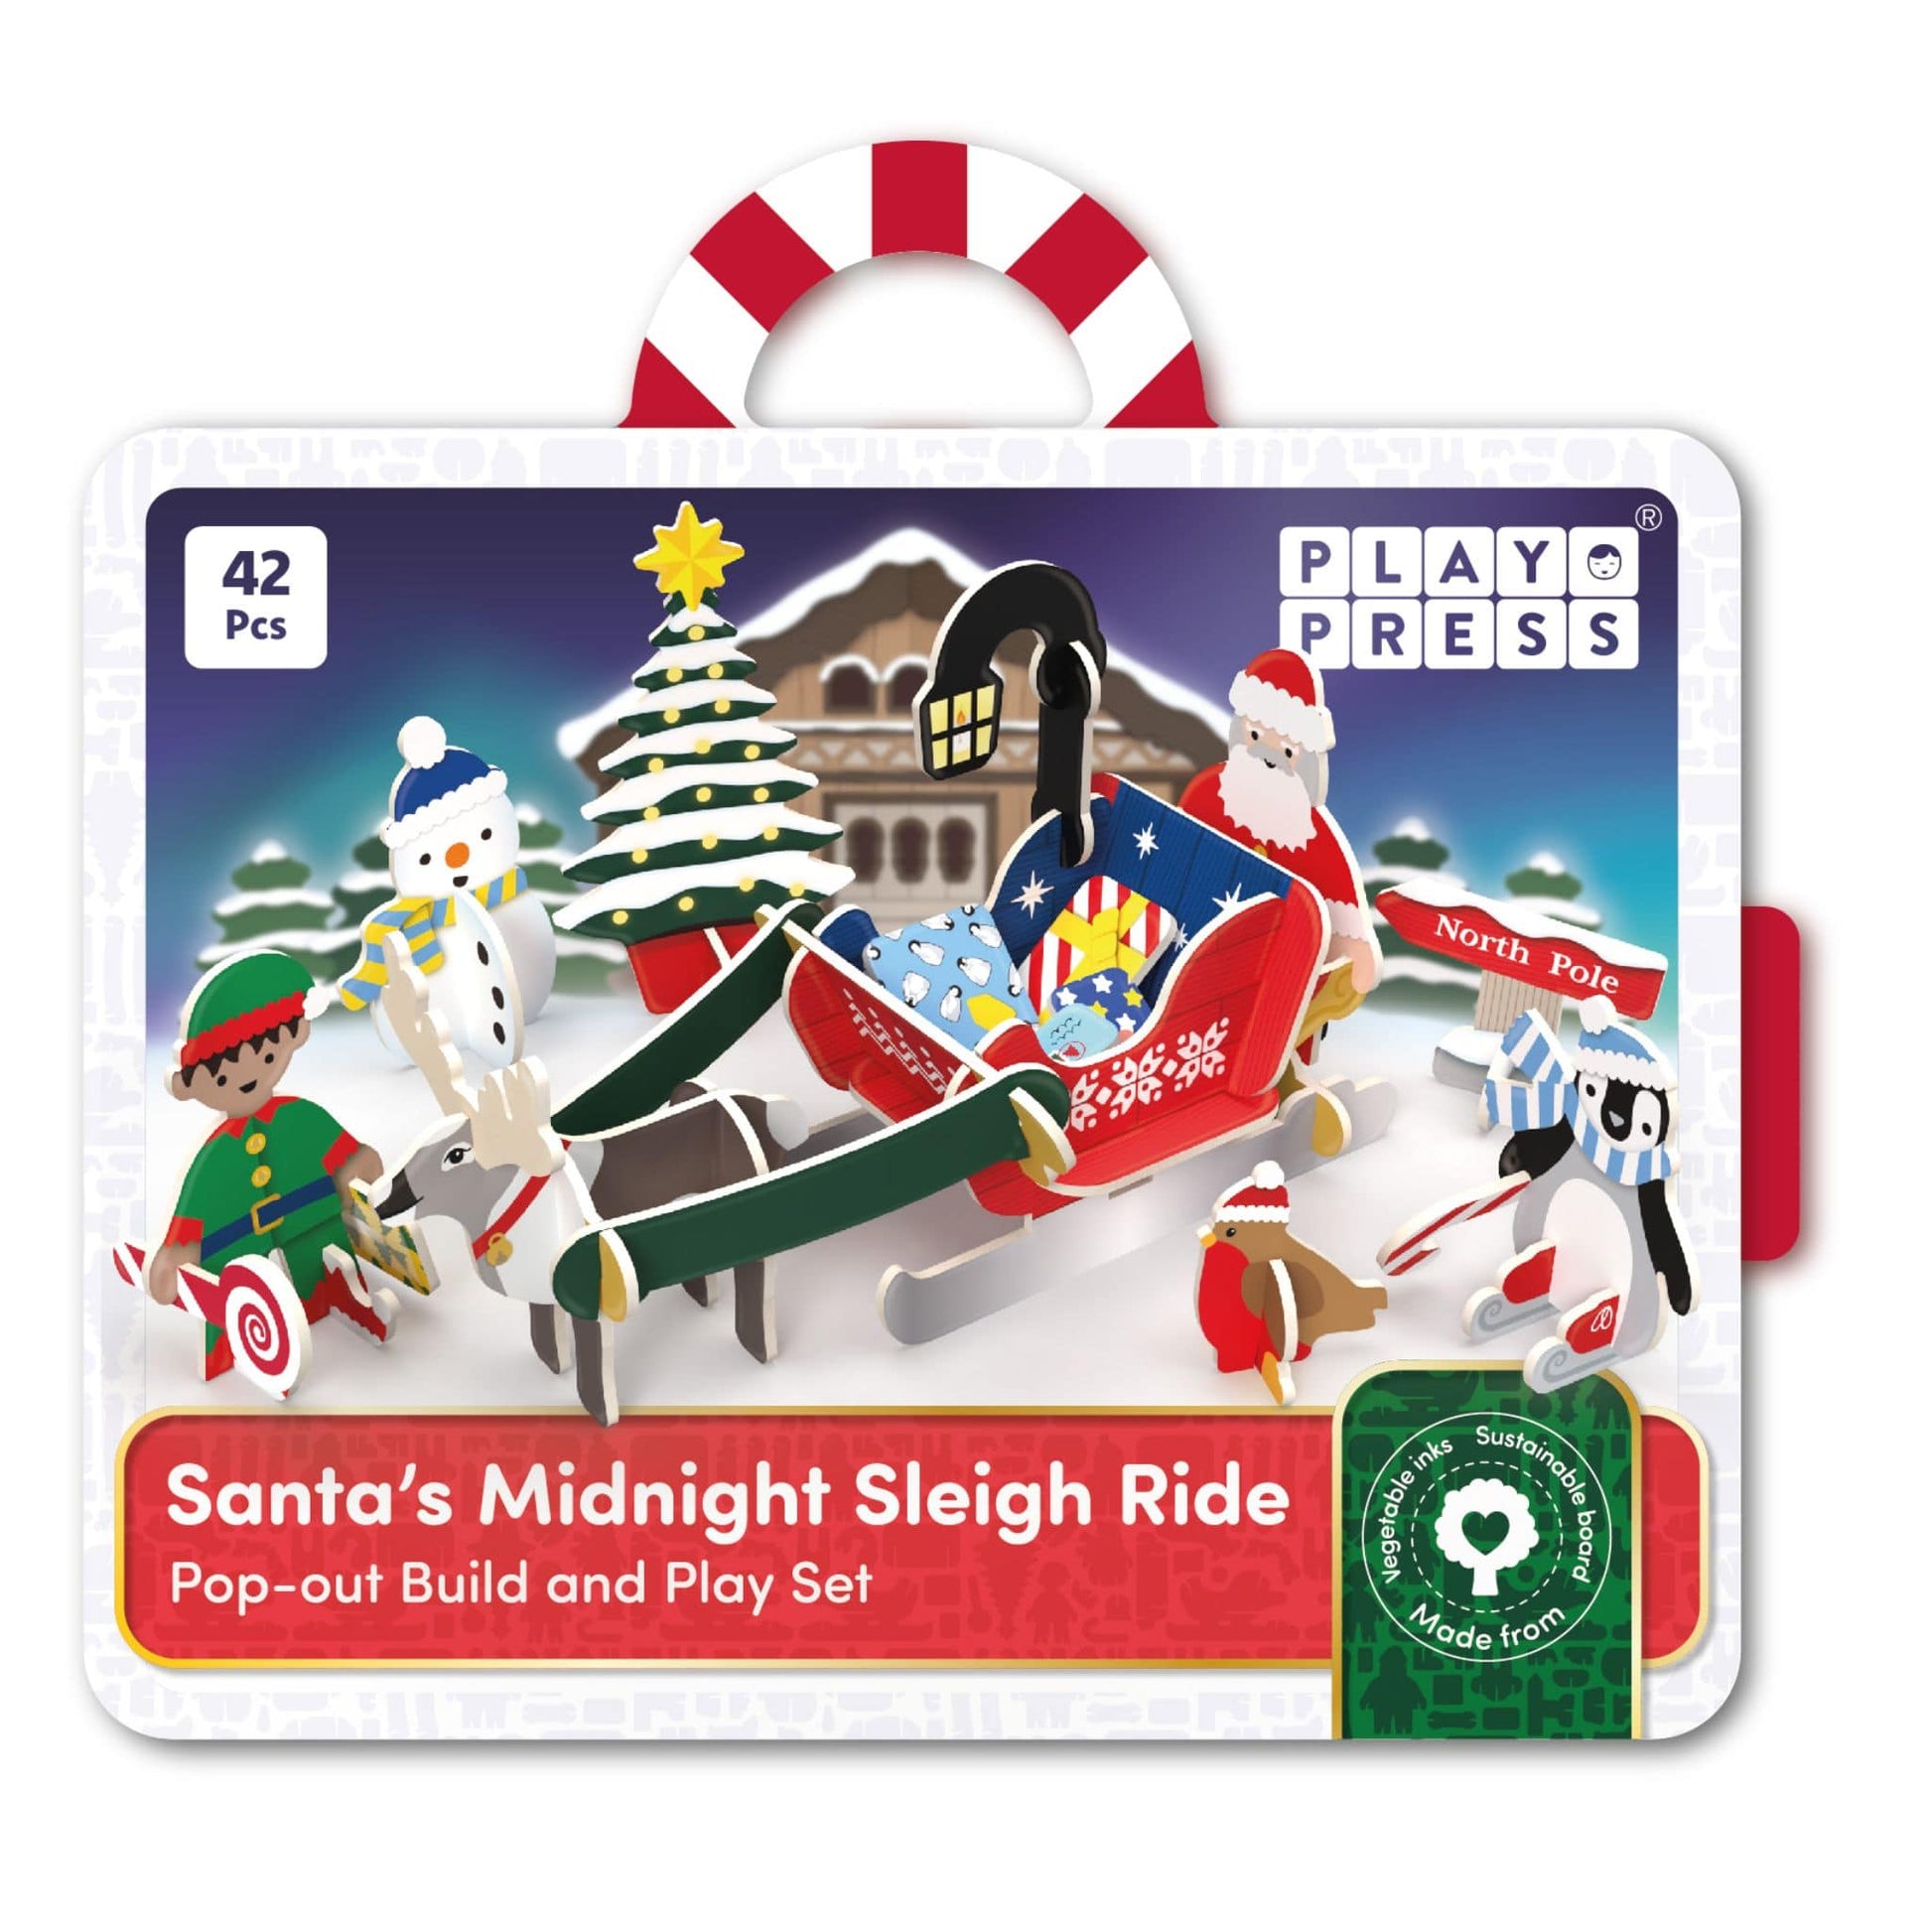 Santa's Midnight Sleigh Ride Build and Play Toy - plastic free packaging